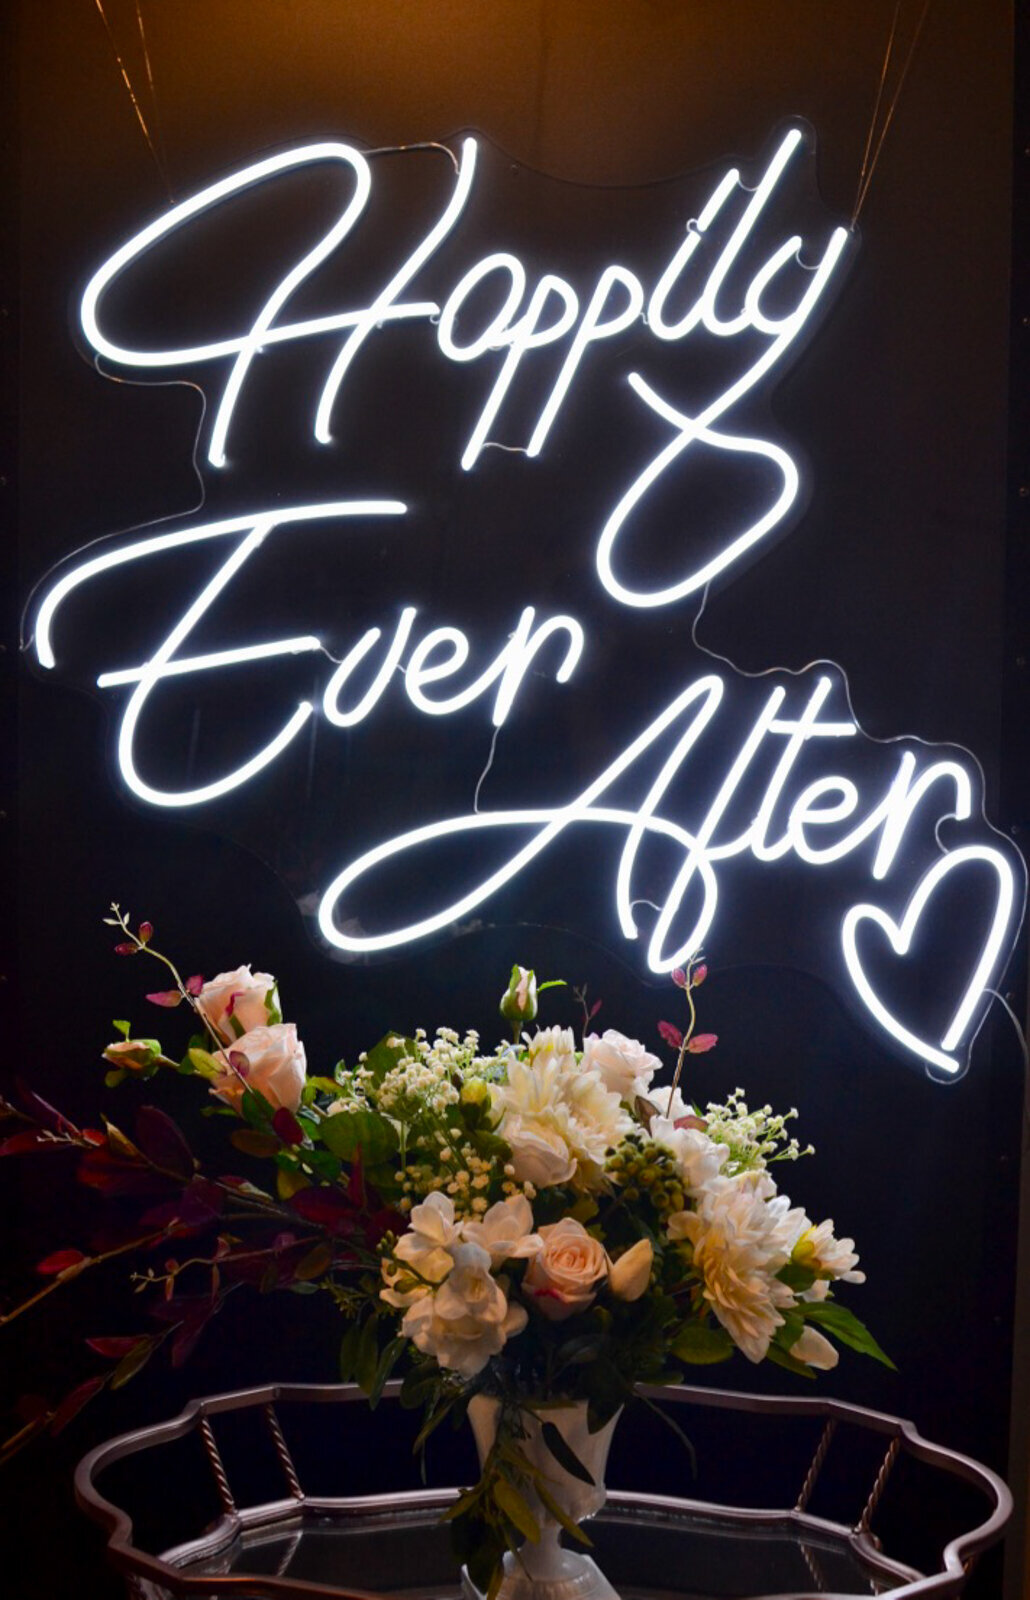 Happily ever after neon sign by Stef Forward Events, trendy and modern decor rentals based in Calgary, AB. Featured on the Brontë Bride Vendor Guide.